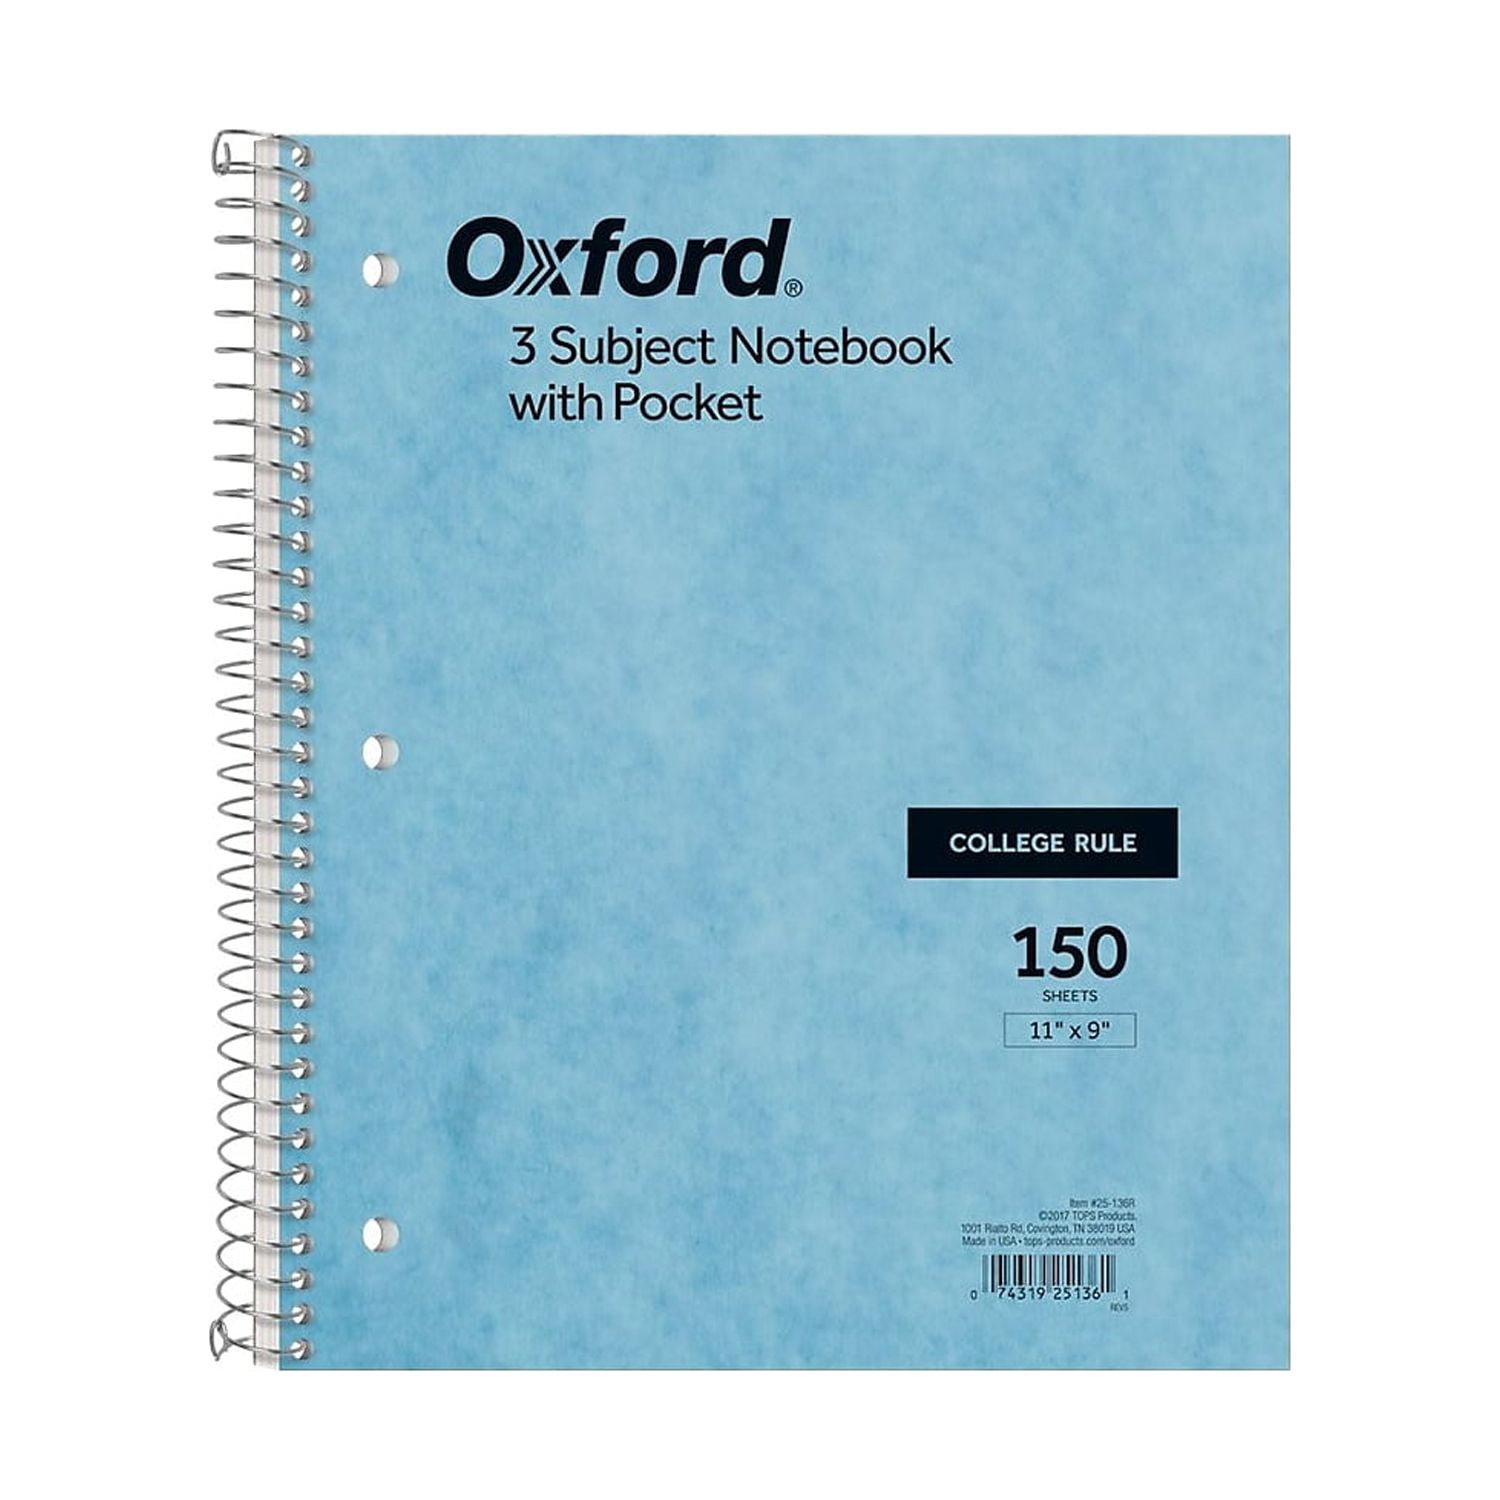 Oxford 3-Subject Notebook 9 x 11 College Ruled 150 Sheets 800870